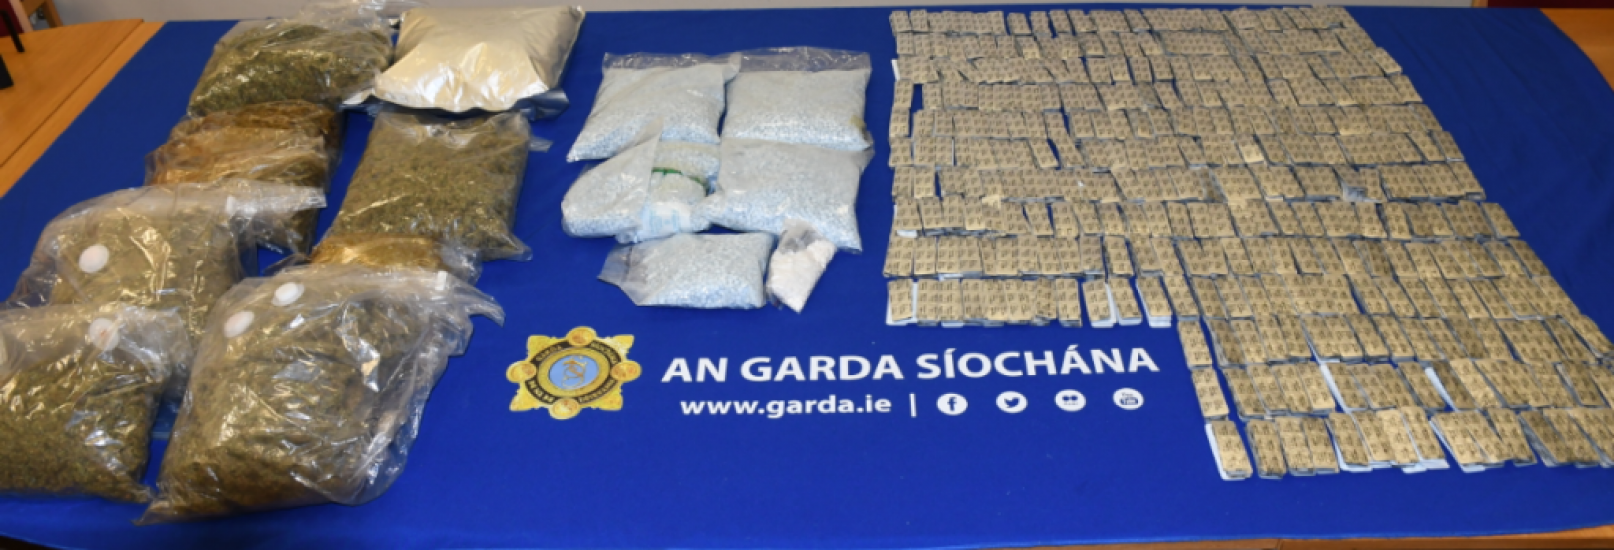 Two Arrested As Gardaí Seize Drugs Worth €388,000